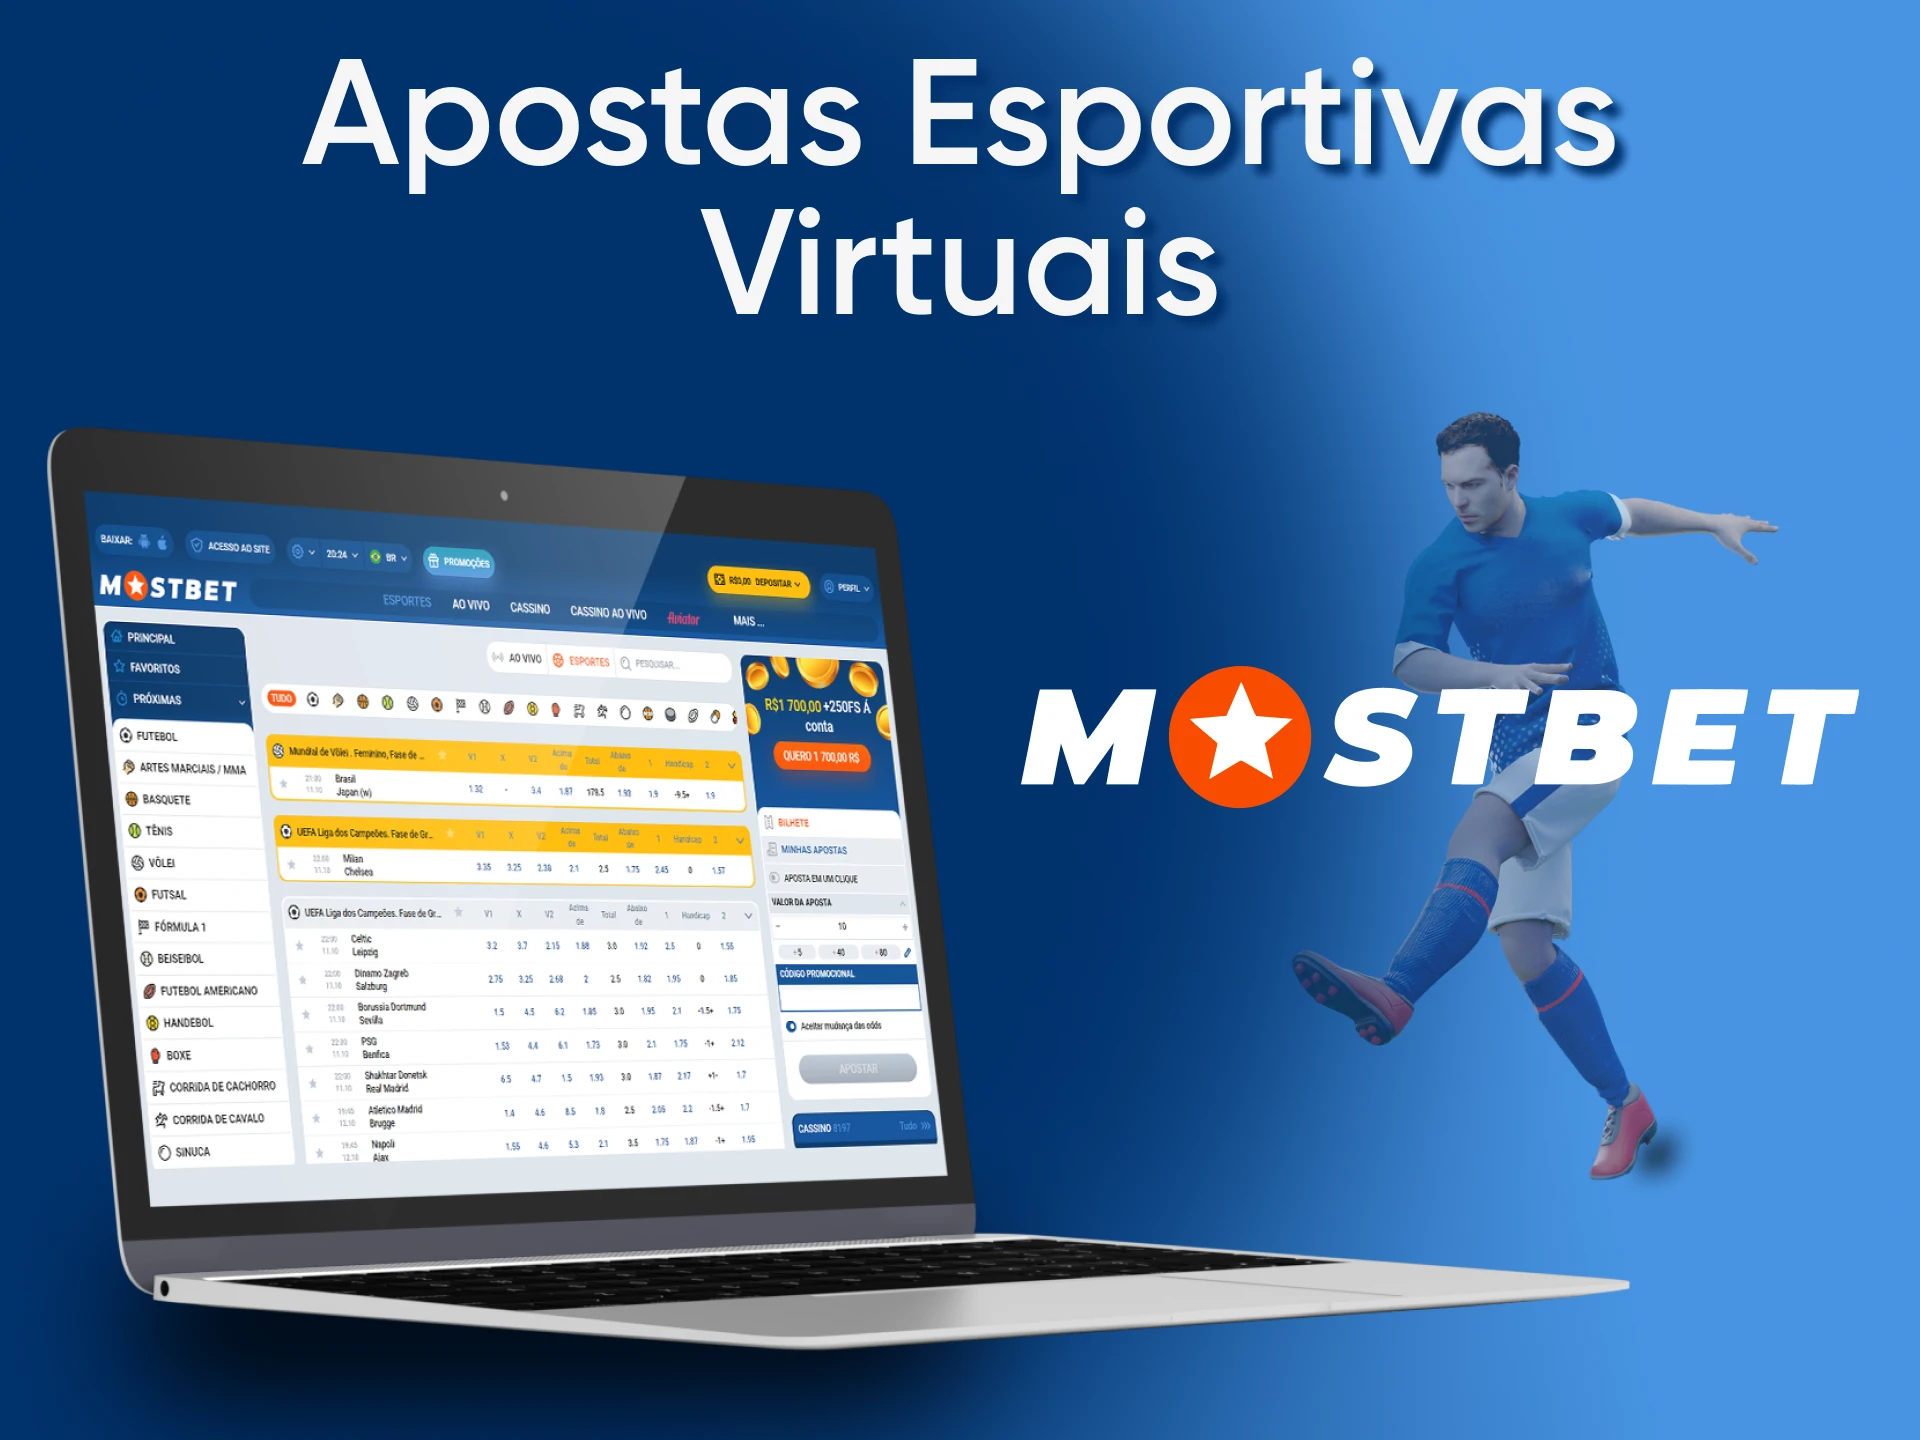 Bet on virtual sports with Mostbet.